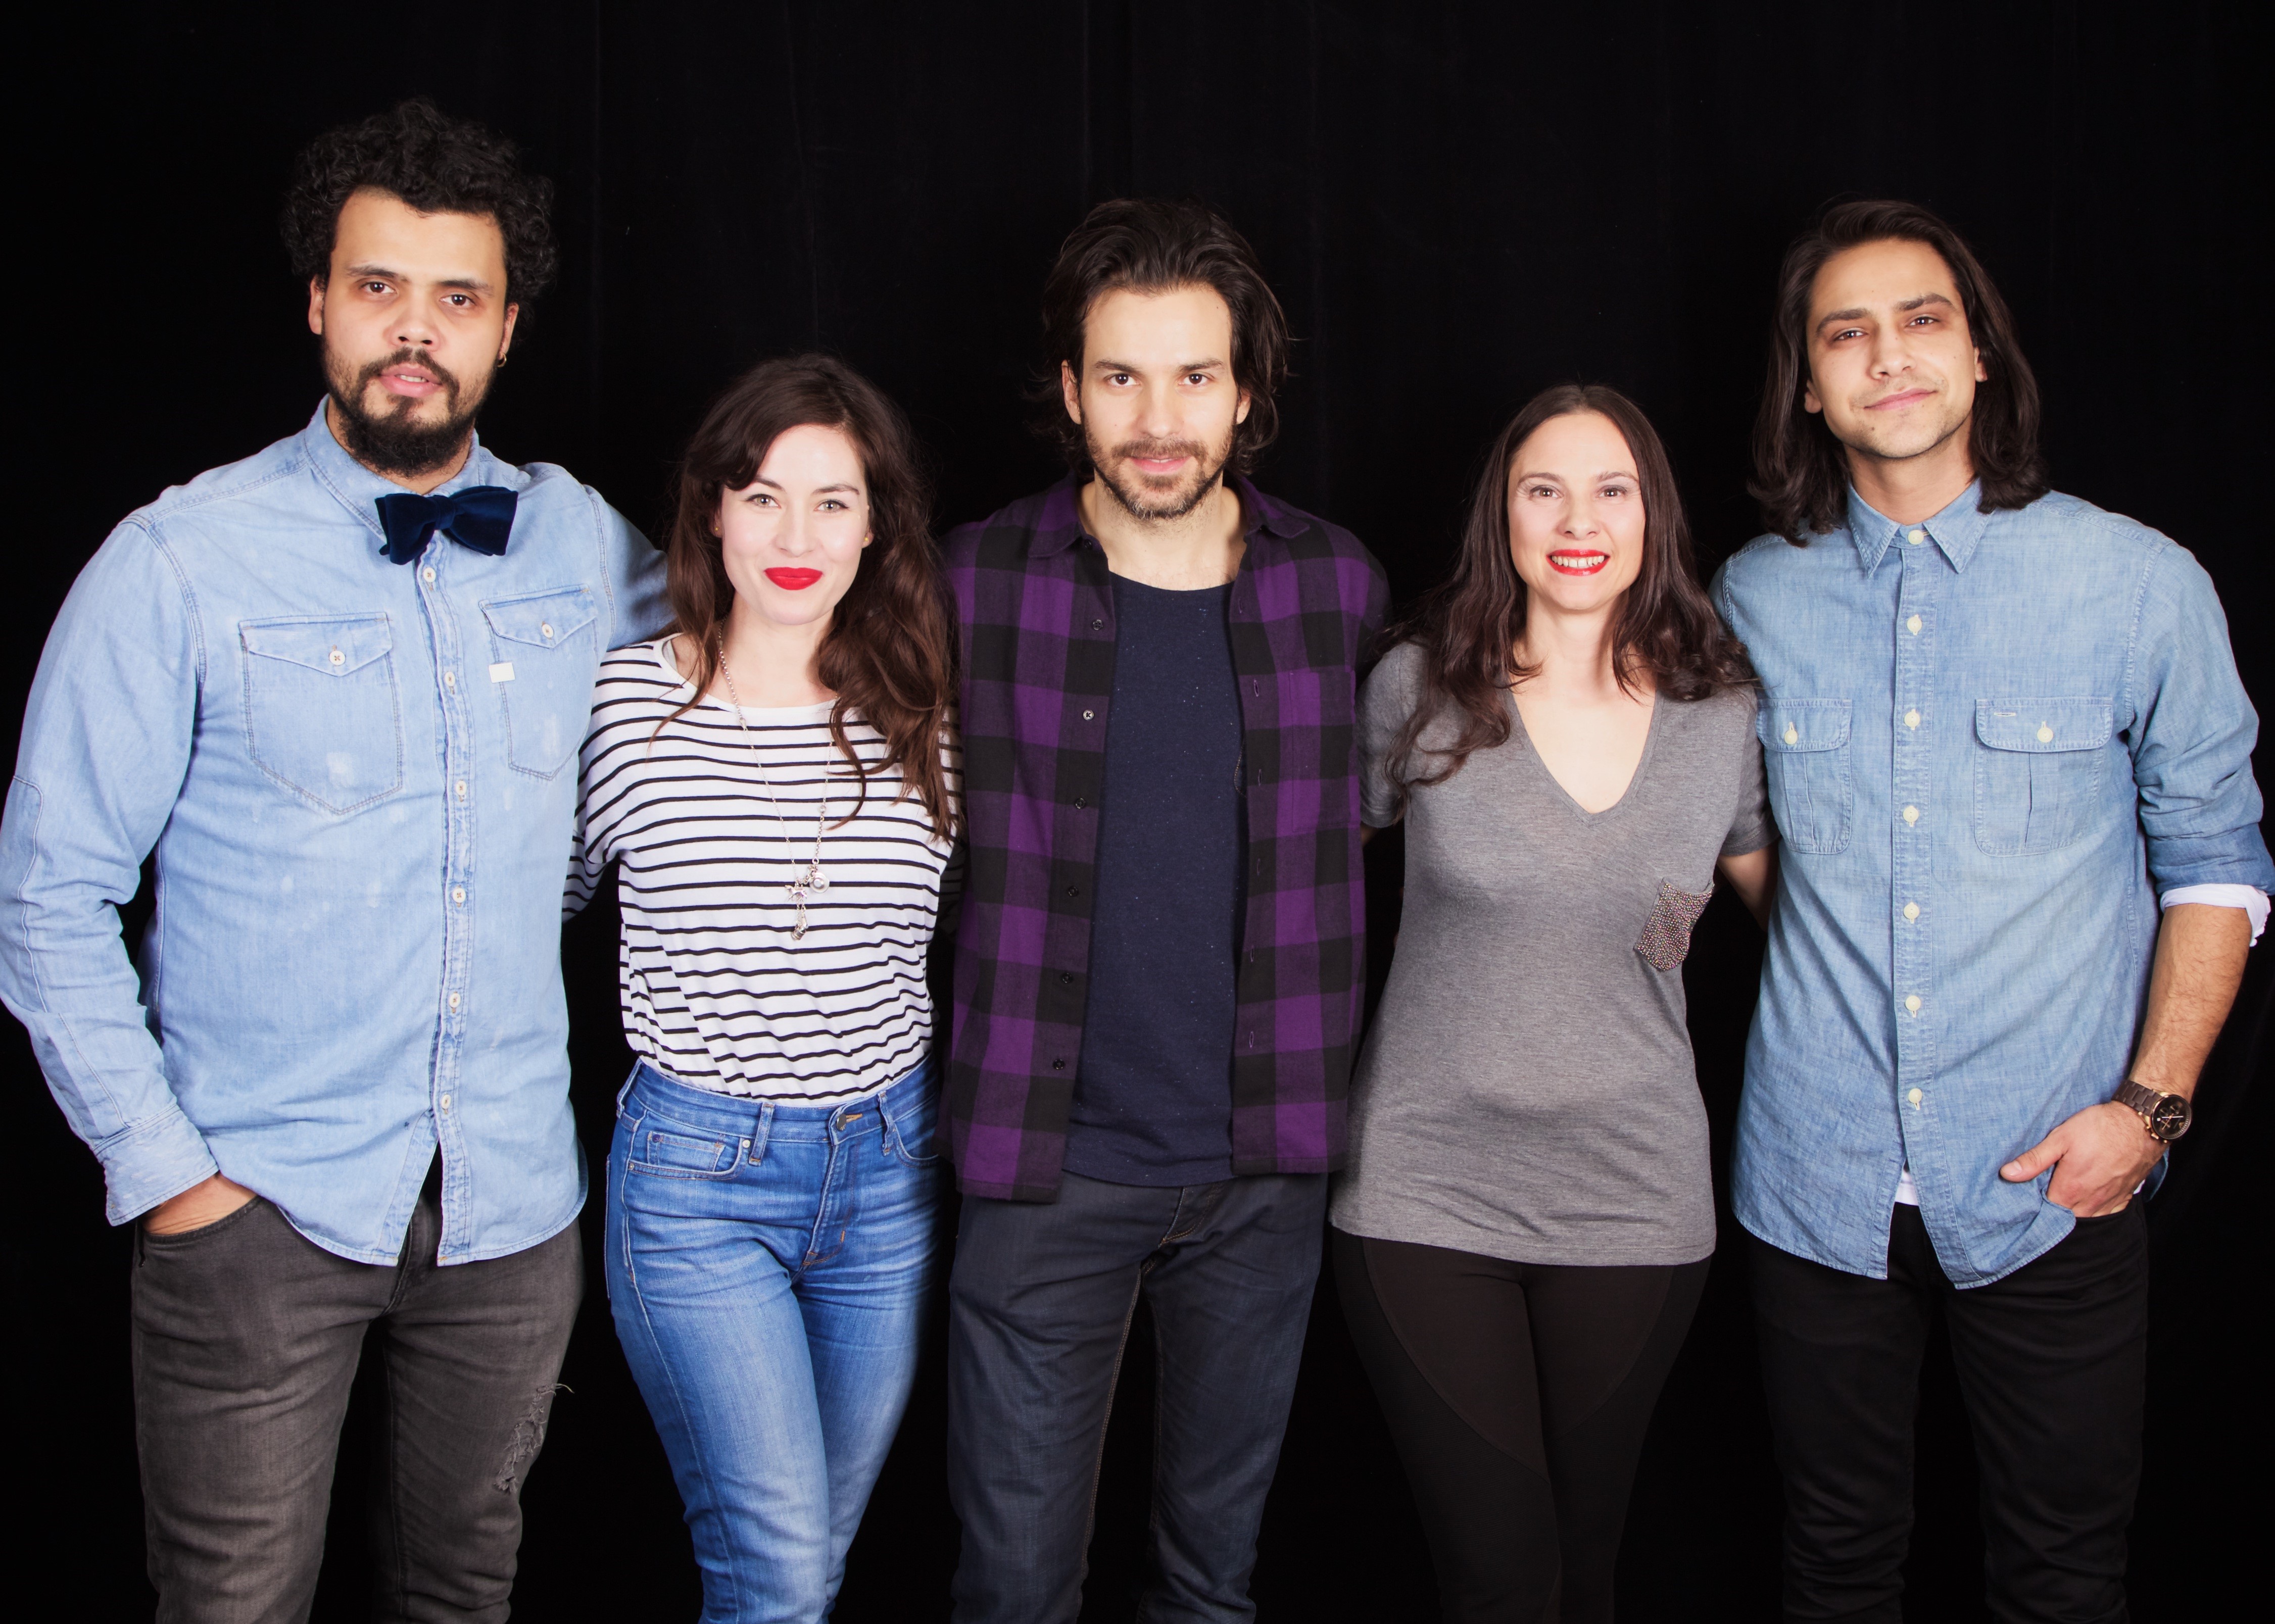 Claire Bueno hosts The Musketeers: Meet the Cast at the Apple Store, Regent Street. Right to Left. Howard Charles, Maimie McCoy, Santiago Cabrera, Claire Bueno & Luke Pasquelino.